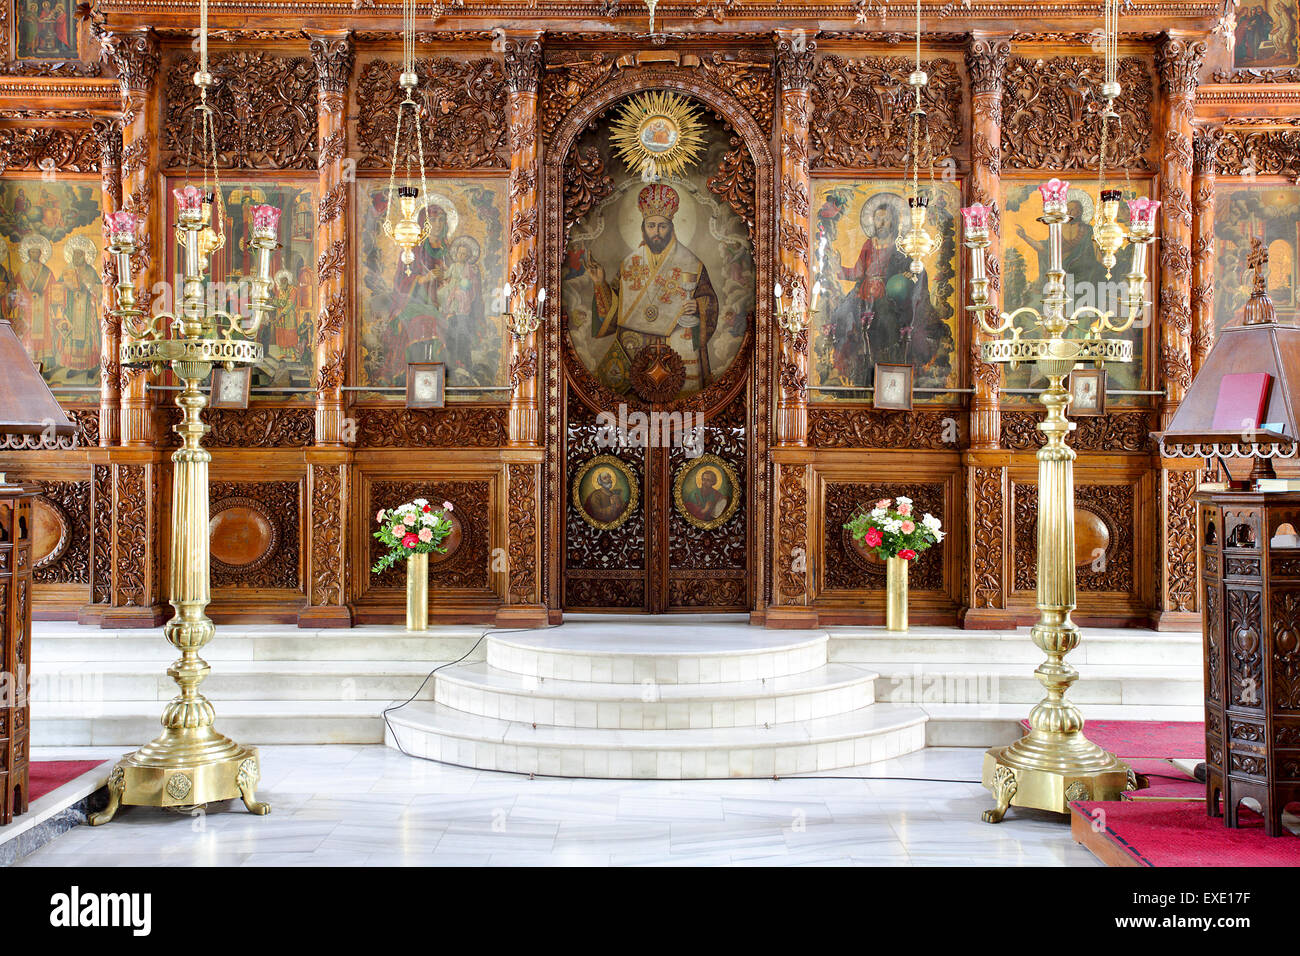 The Altar within the Cathedral of Rethymnon, fine wood carving and Icons adorn this splendid, deatailed creation. Stock Photo